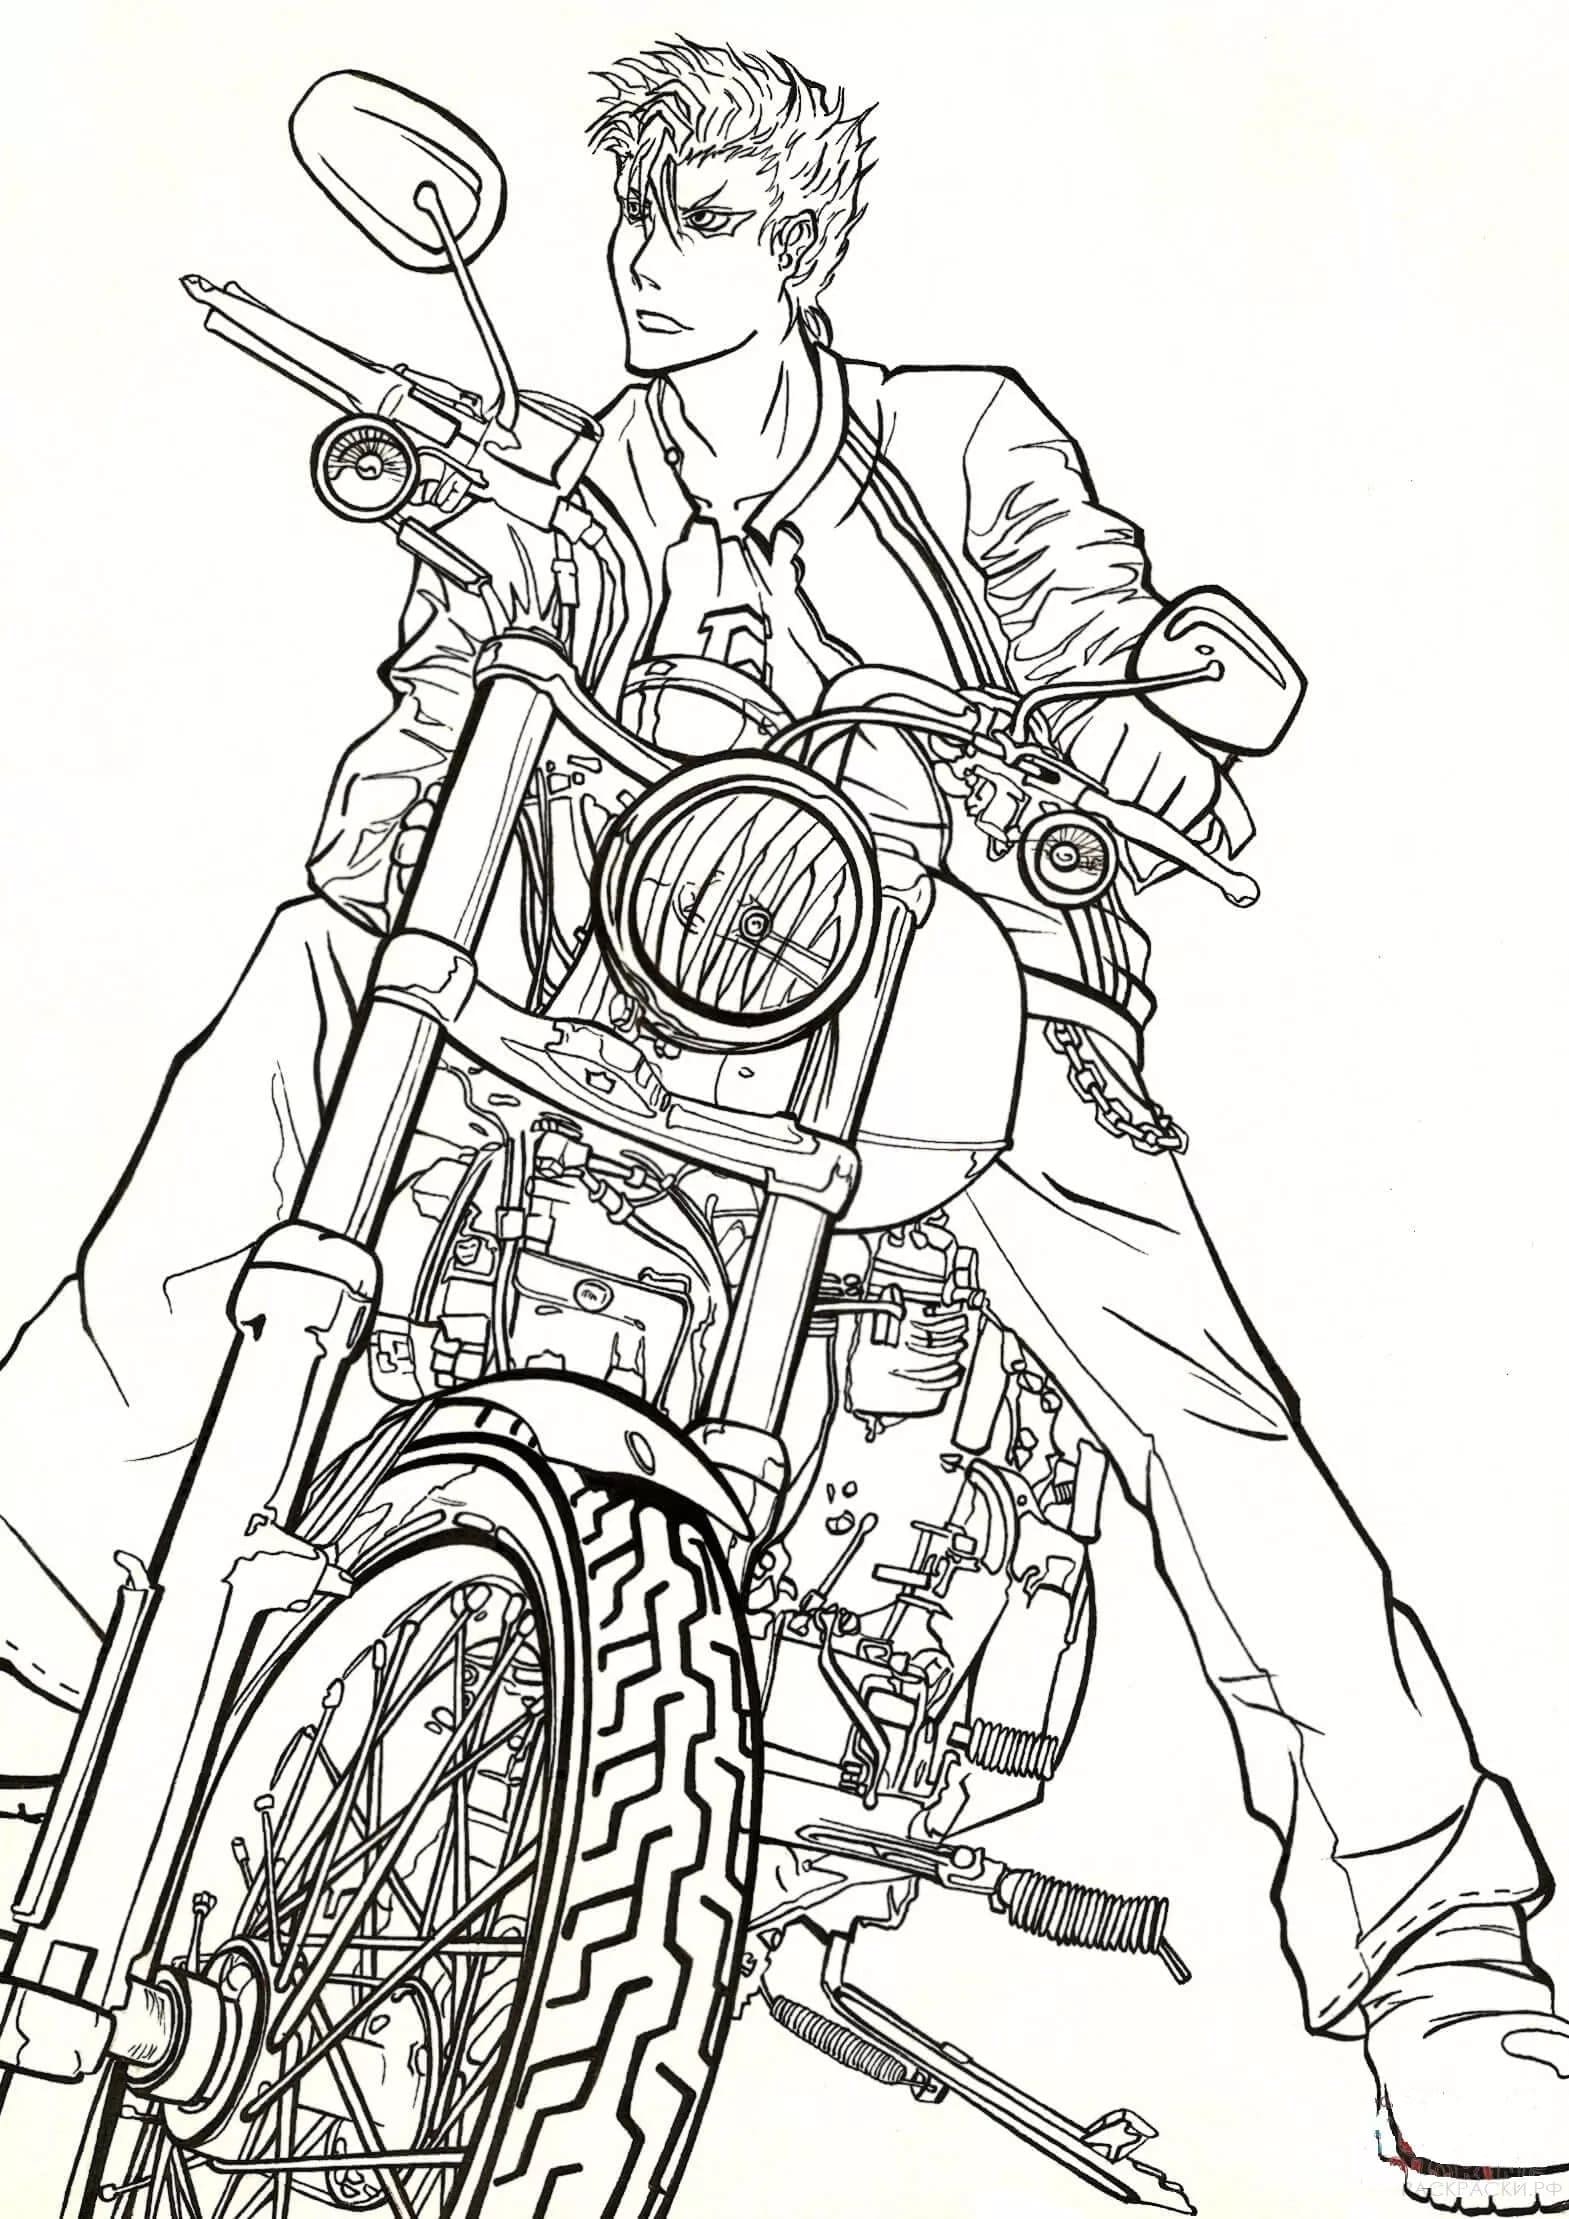 133 Dirt Bike Coloring Pages: Rev Up Your Creativity 71